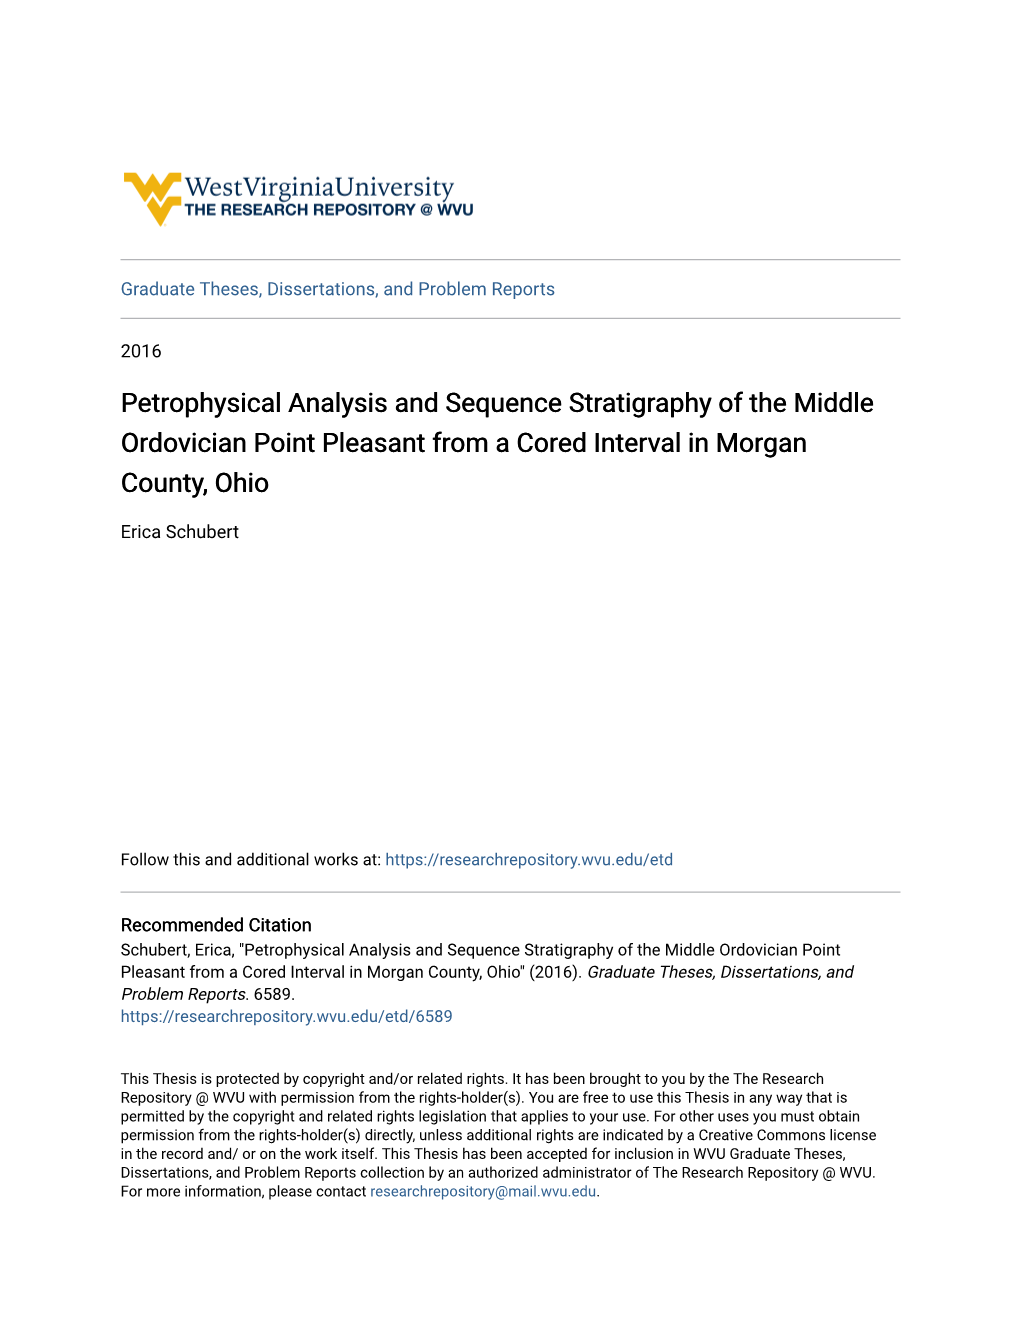 Petrophysical Analysis and Sequence Stratigraphy of the Middle Ordovician Point Pleasant from a Cored Interval in Morgan County, Ohio